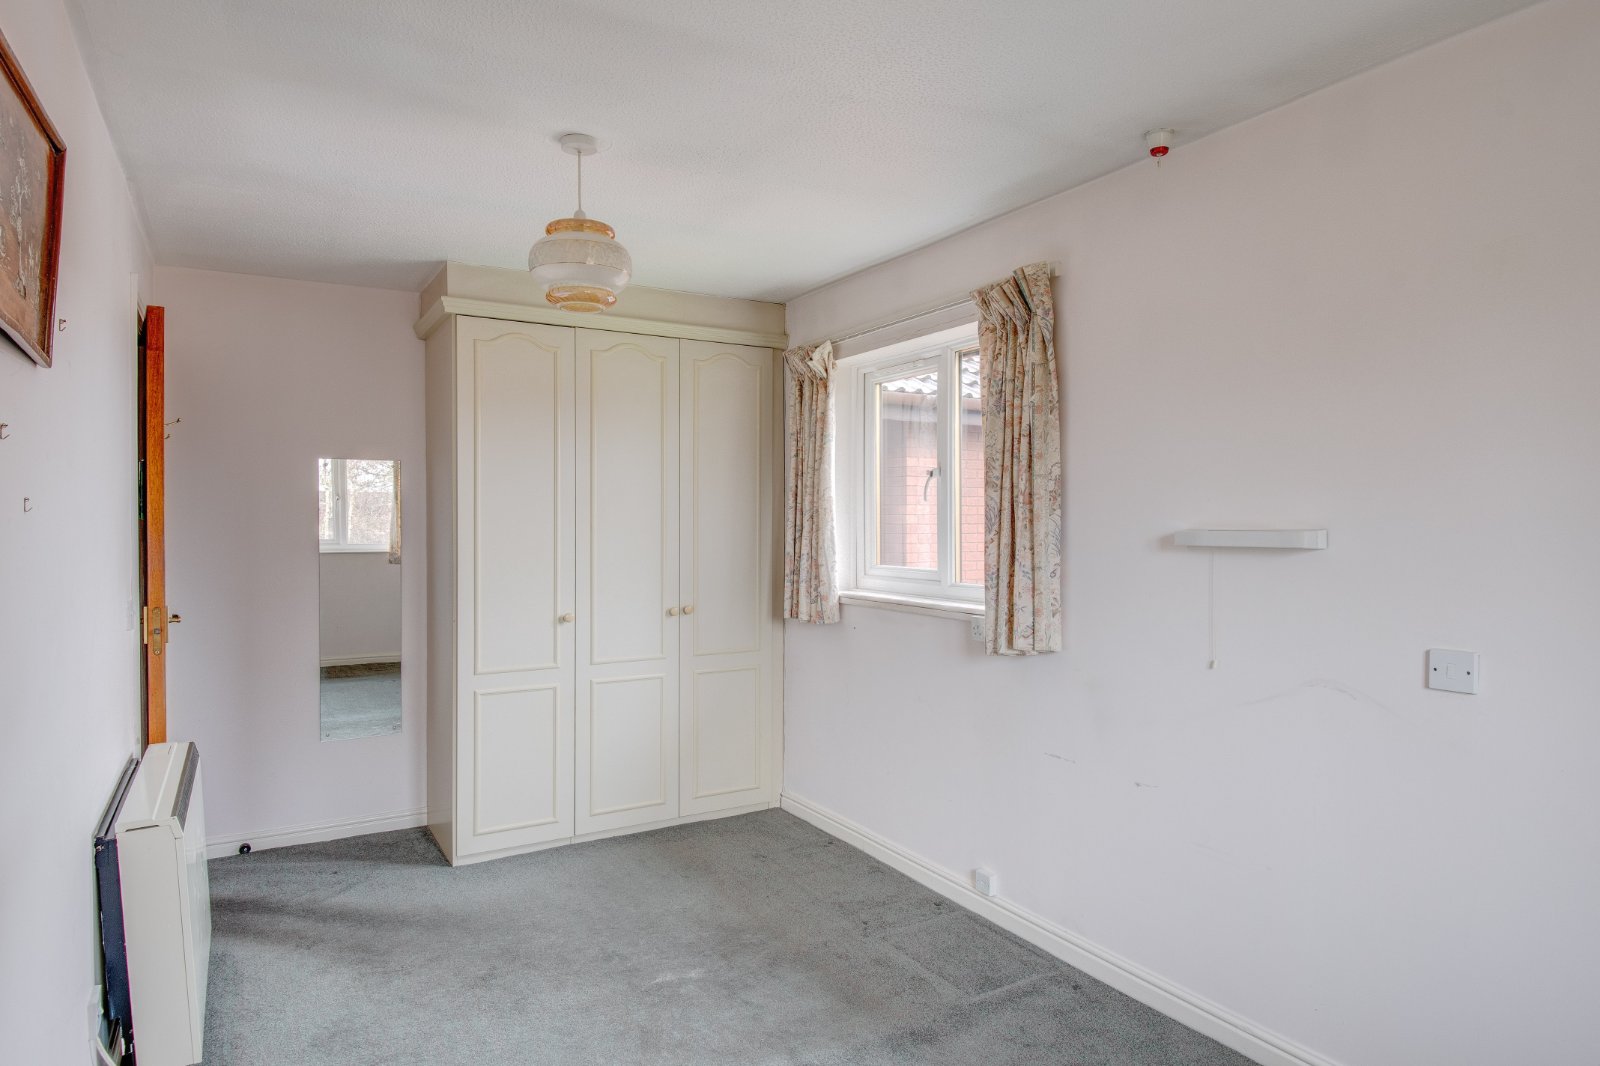 1 bed  for sale in Housman Park, Bromsgrove  - Property Image 7